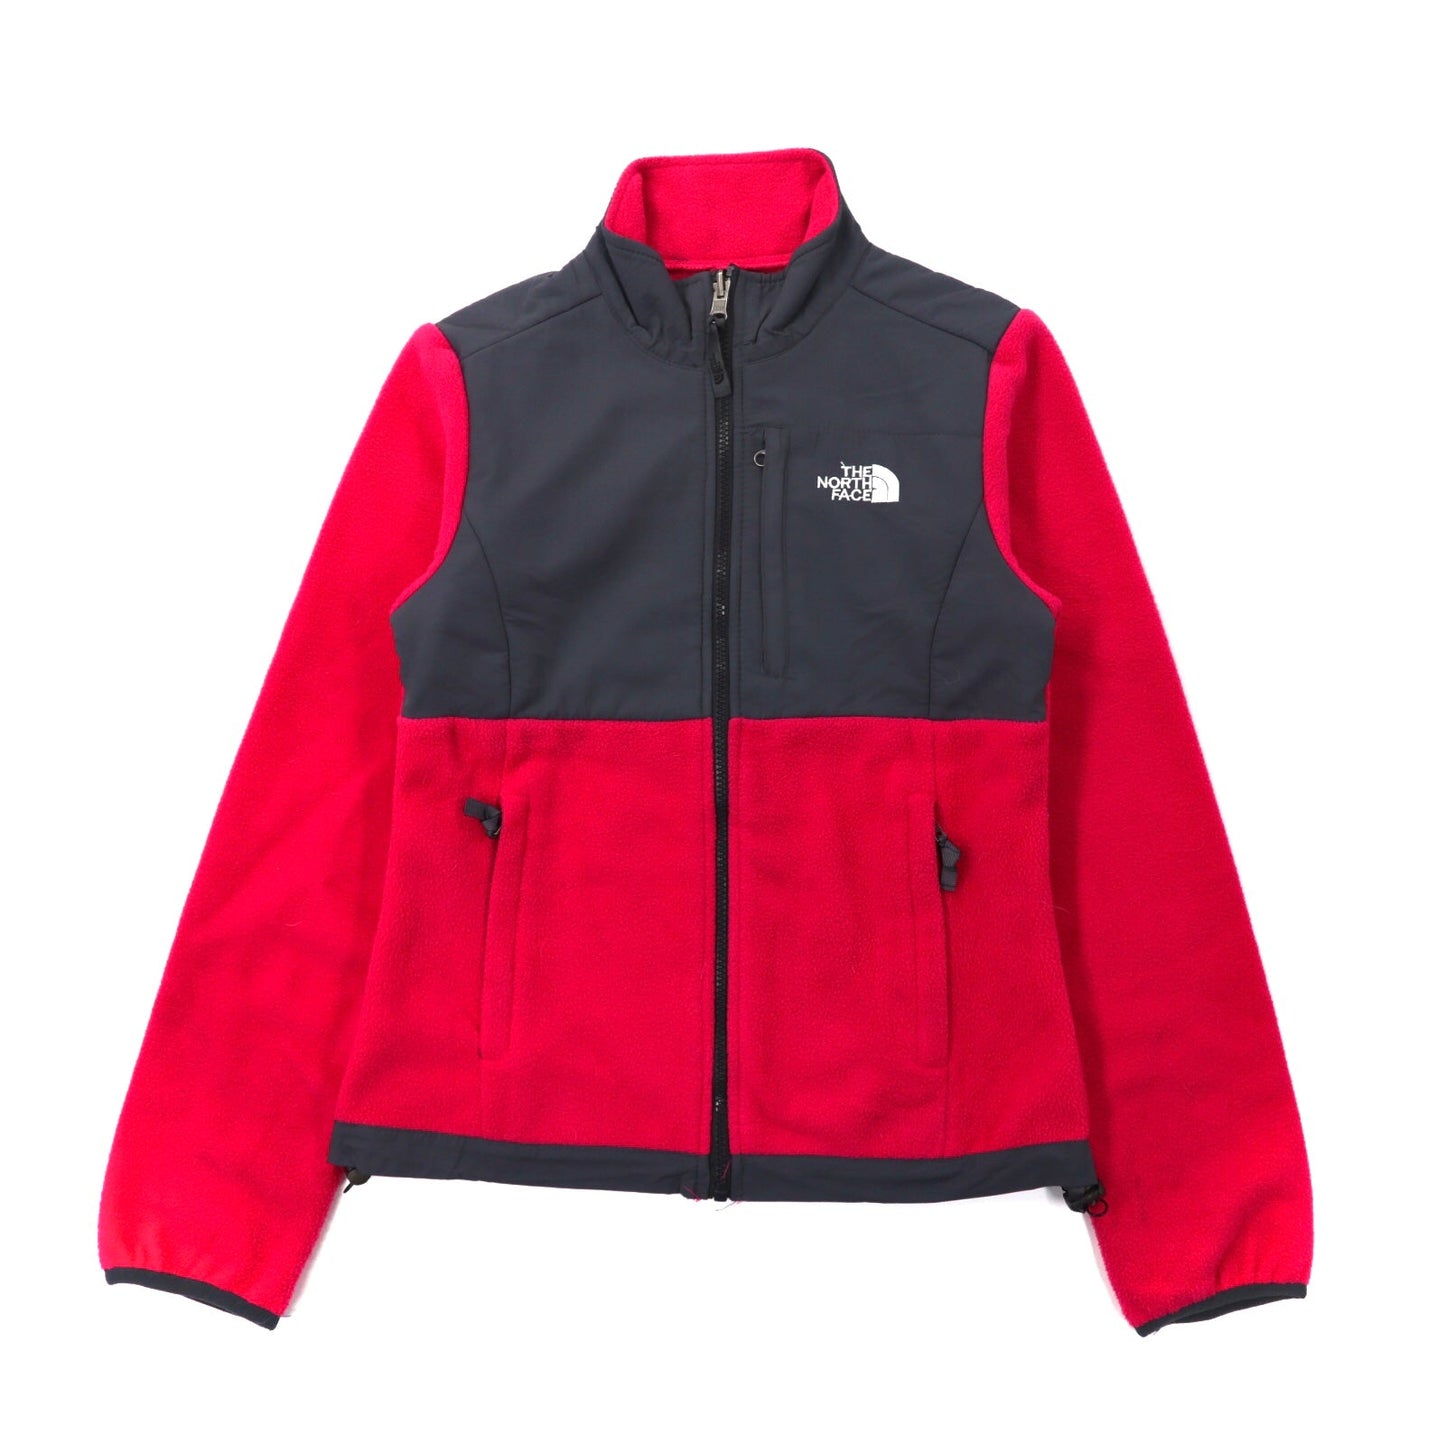 THE NORTH FACE フリースジャケット S ピンク POLARTEC-THE NORTH FACE-古着